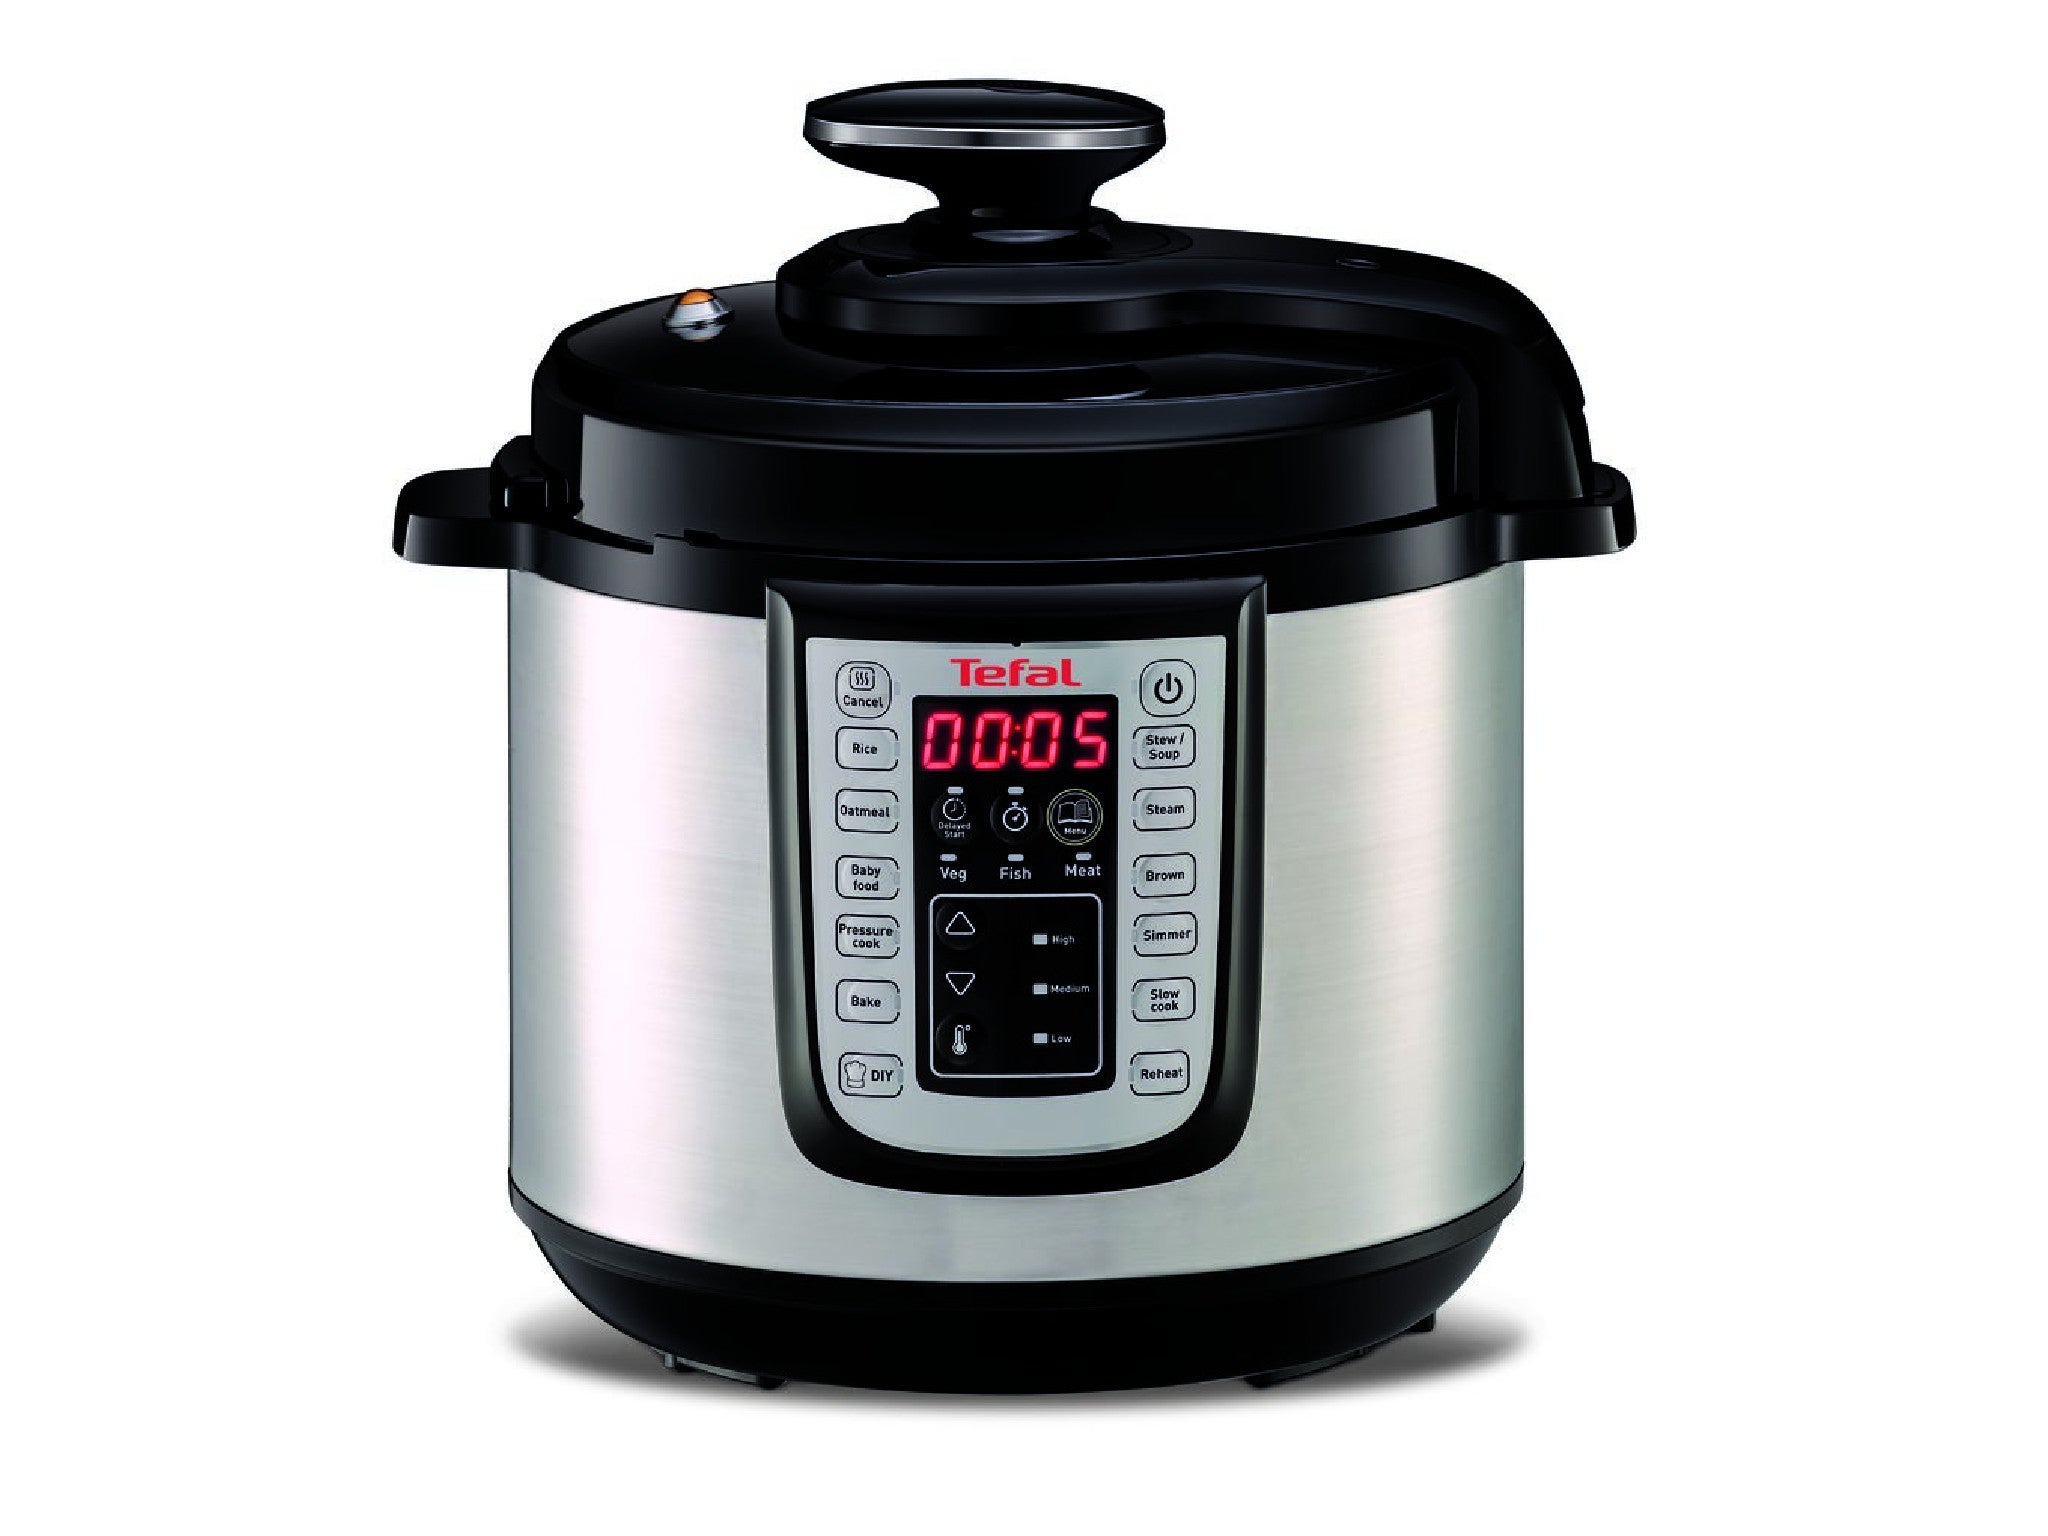 Tefal All-in-One Electrical Pressure Cooker